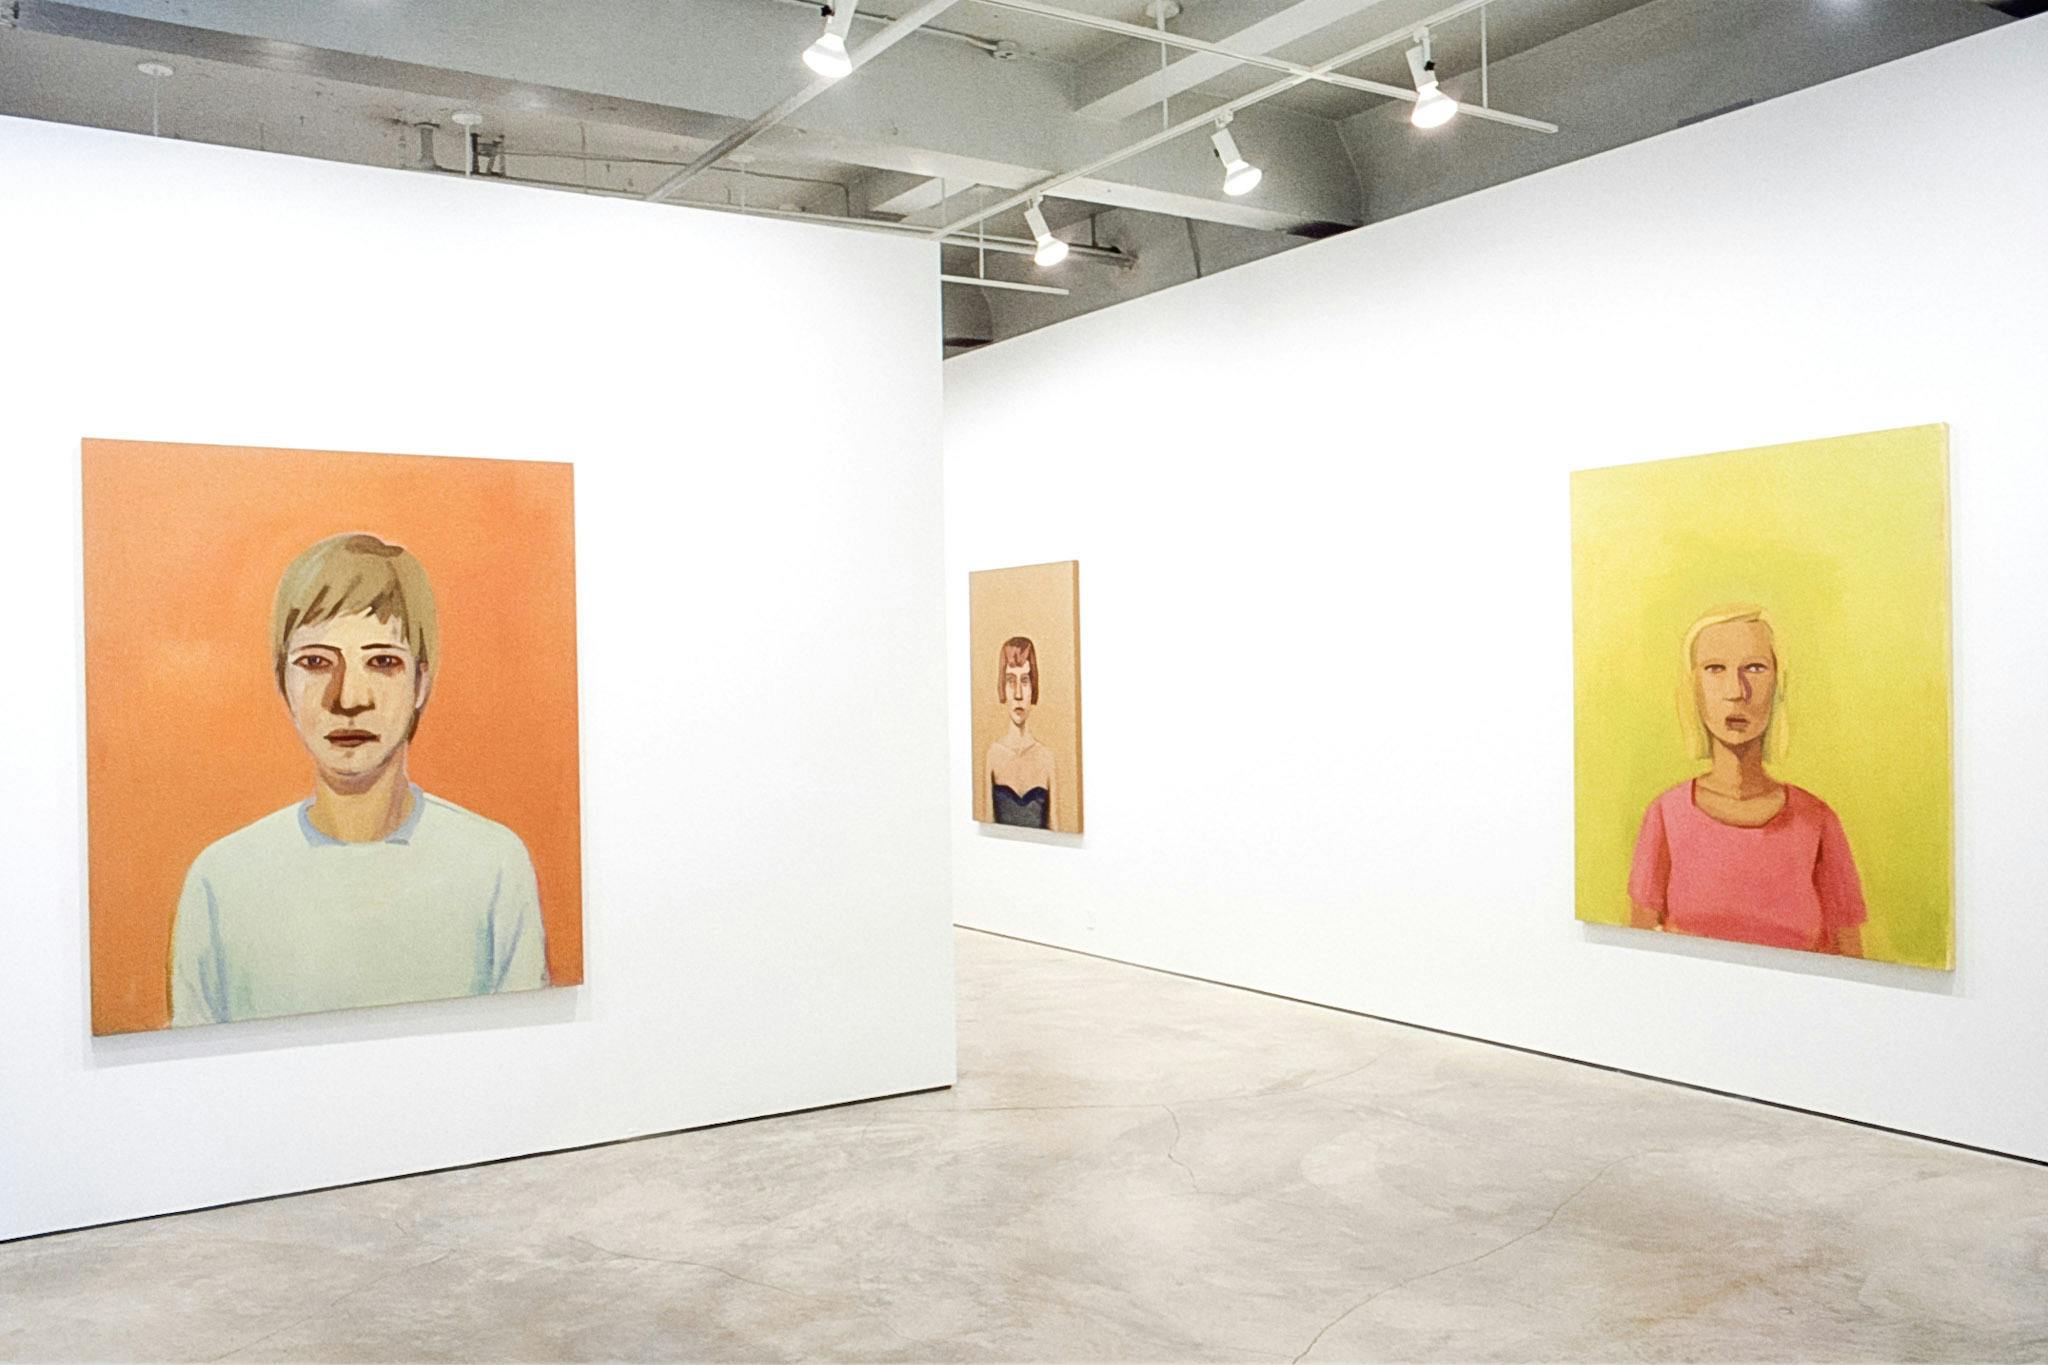 Three portrait paintings are installed on the gallery walls. The one in the front is a short-haired person standing in an orange background, wearing a white shirt and looking straight at the viewer. 